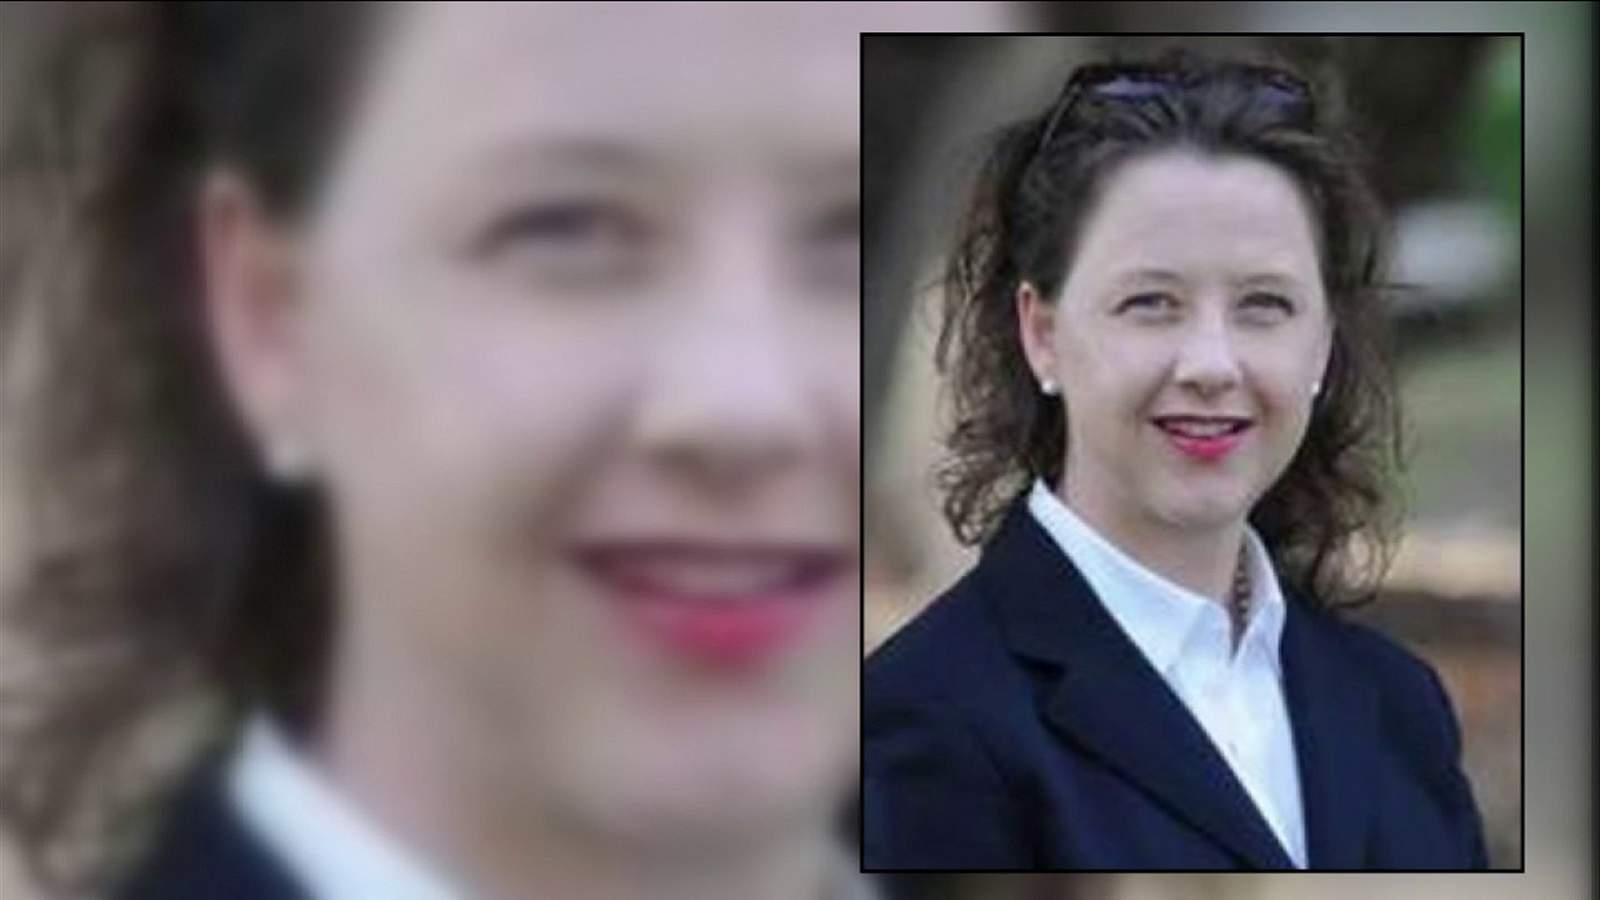 Ga. district attorney fires back after accusations she stopped arrests following Ahmaud Arbery shooting